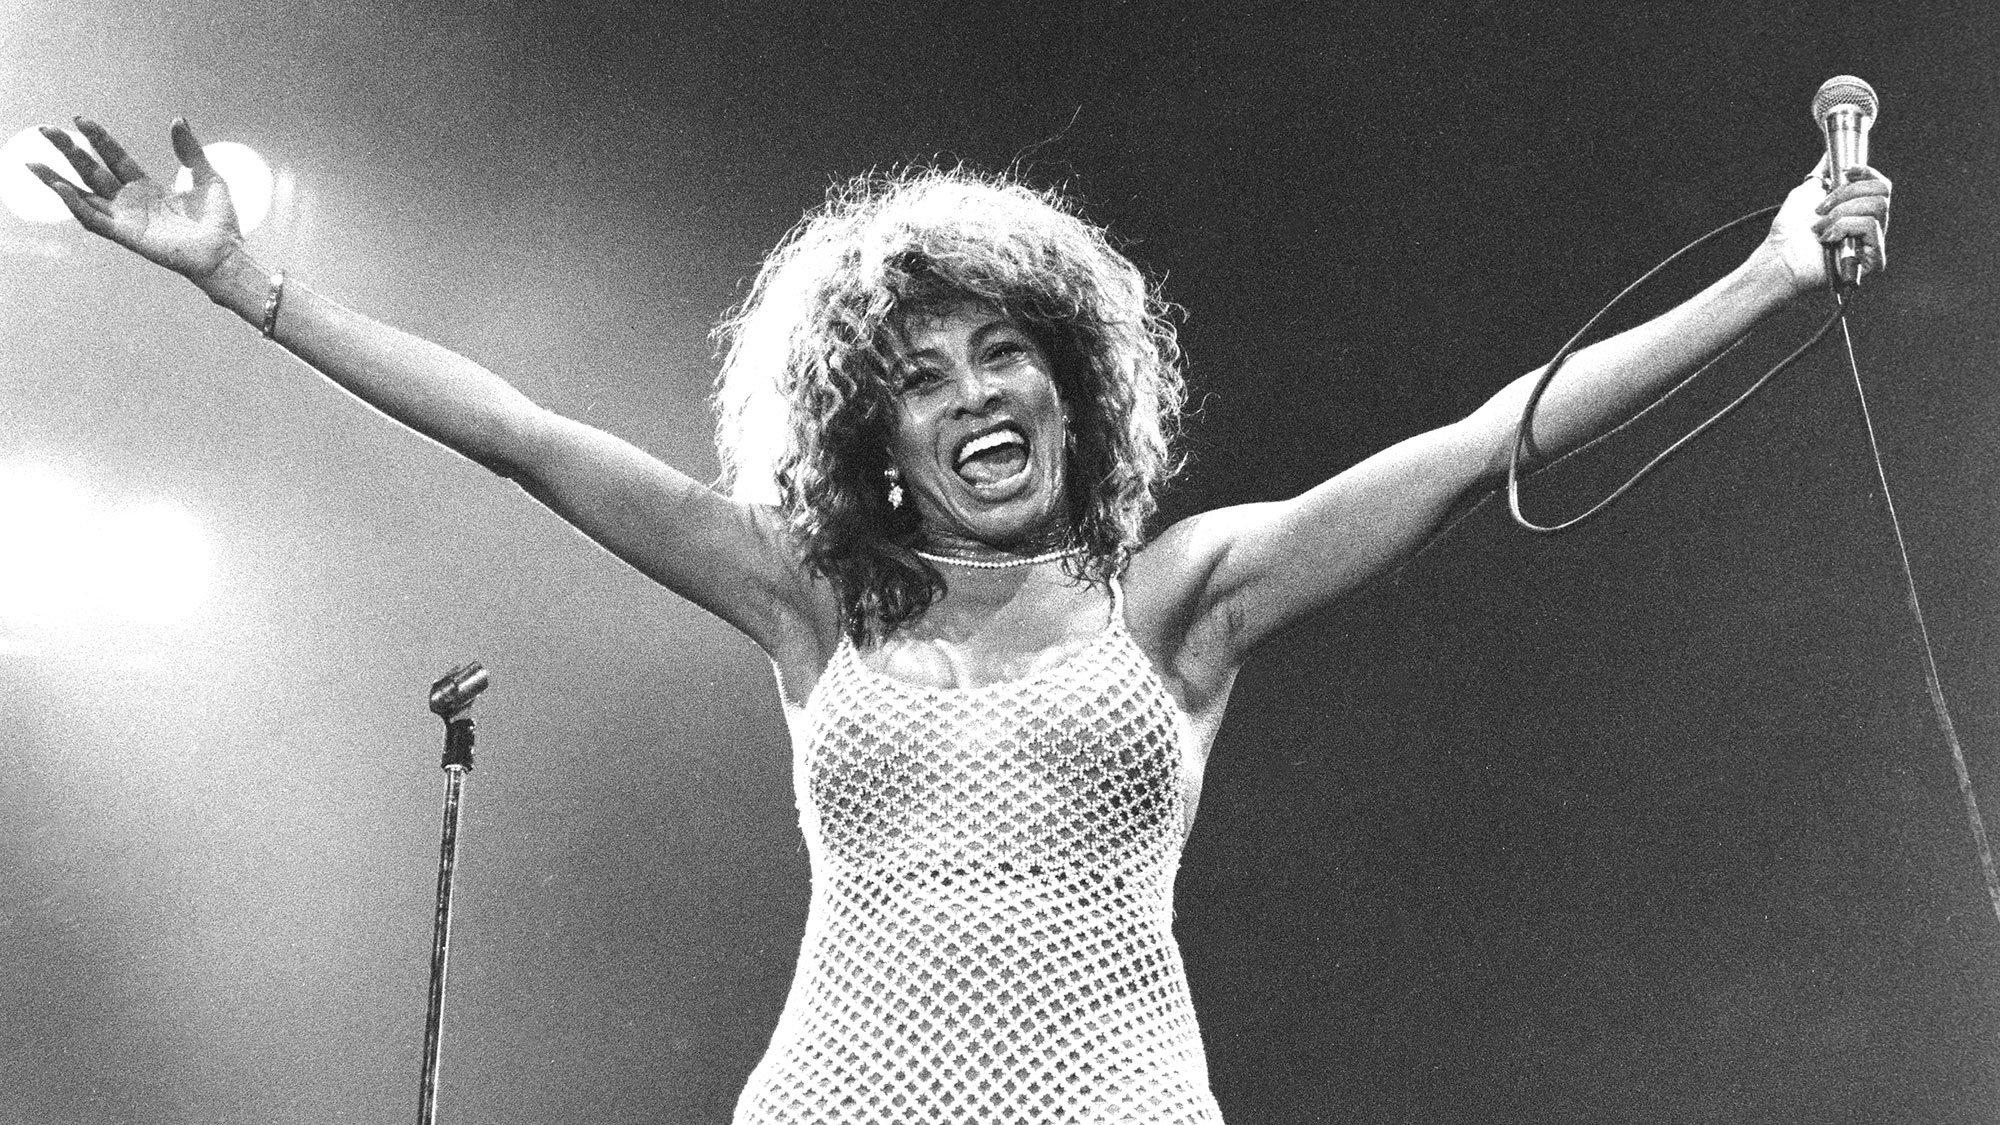 Tina Turner on stage at Wembley 1990.